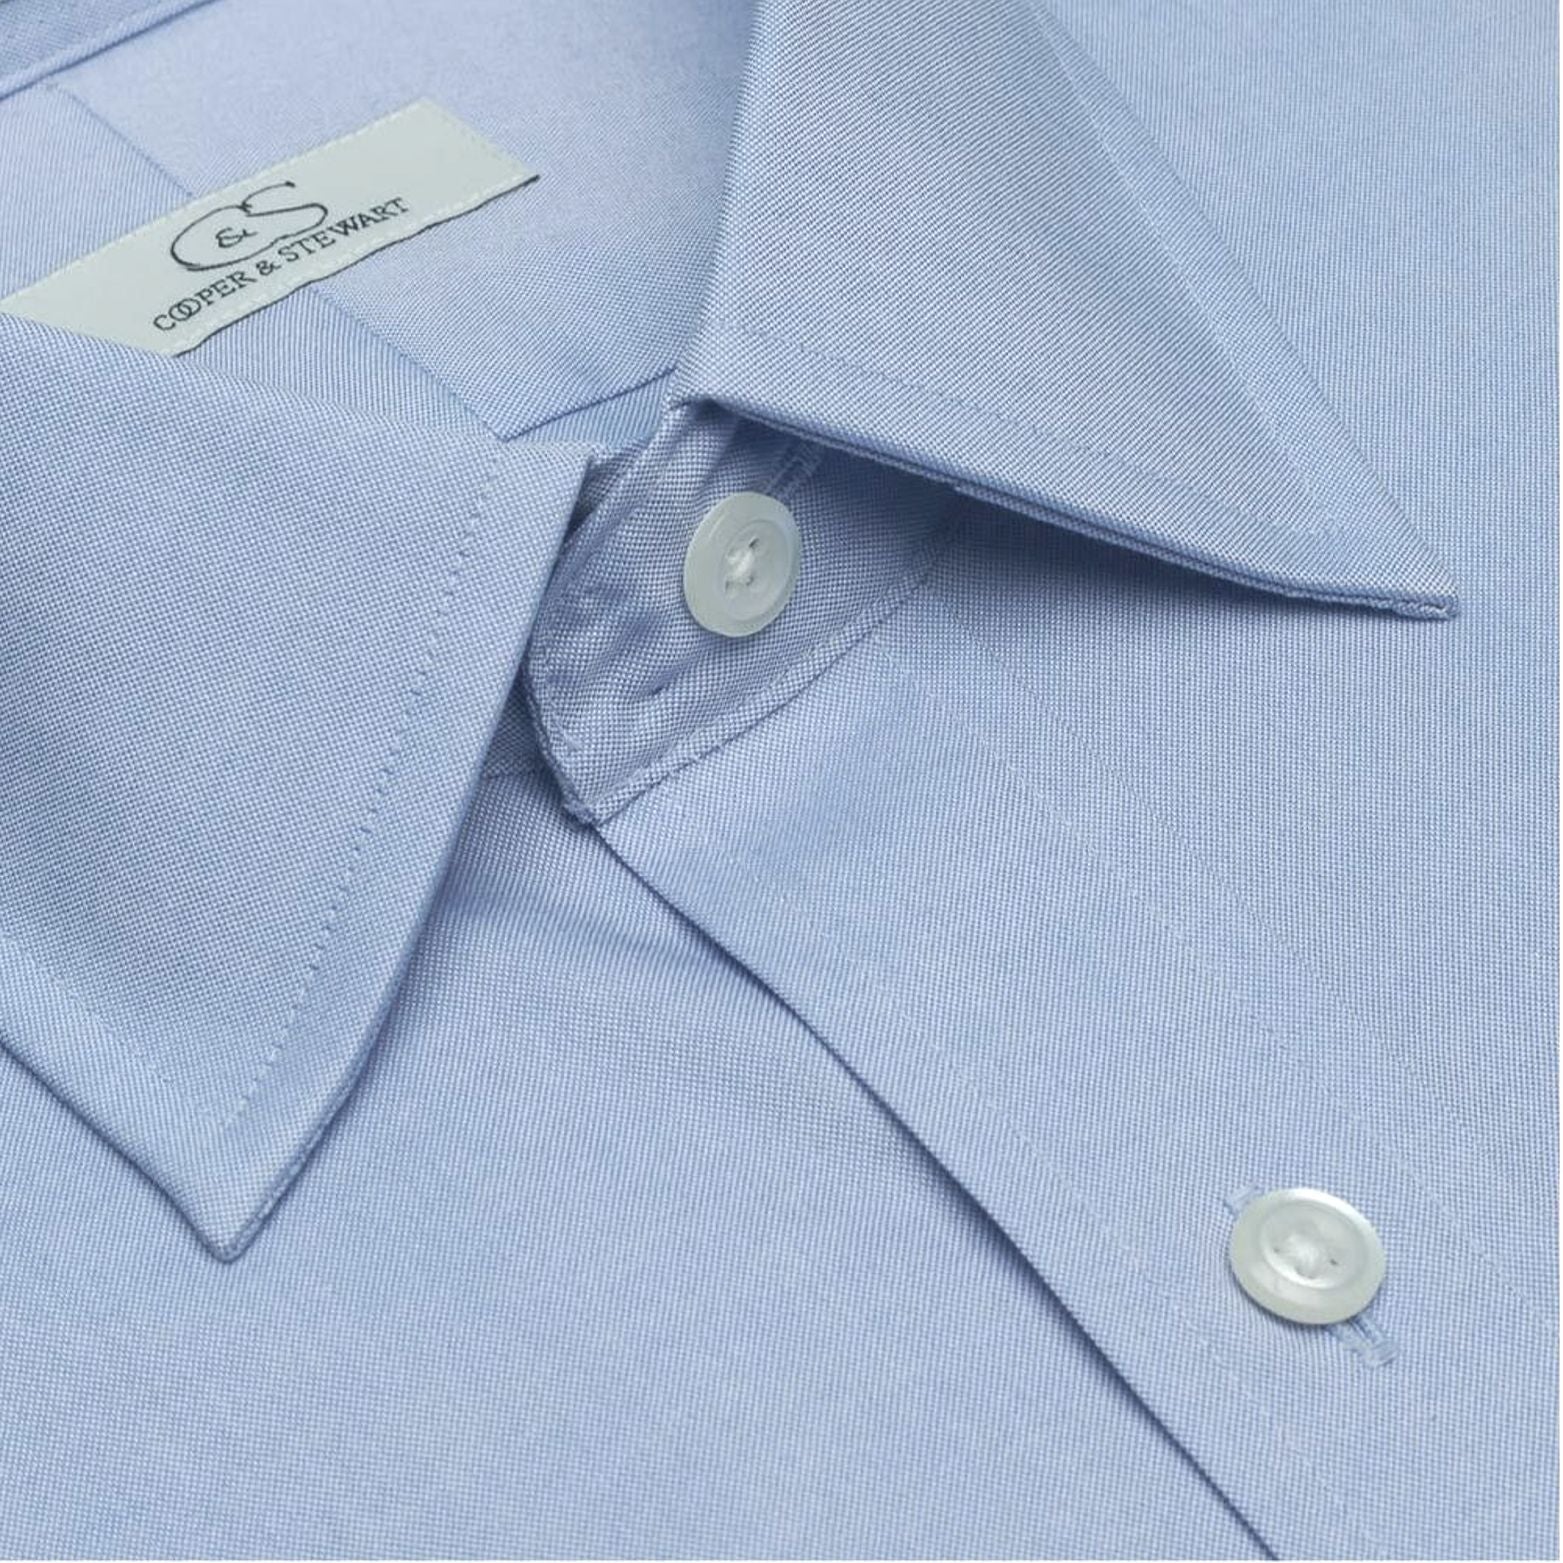 The Classic Blue - Wrinkle-Free Pinpoint Oxford Cotton Dress Shirt by  Cooper & Stewart